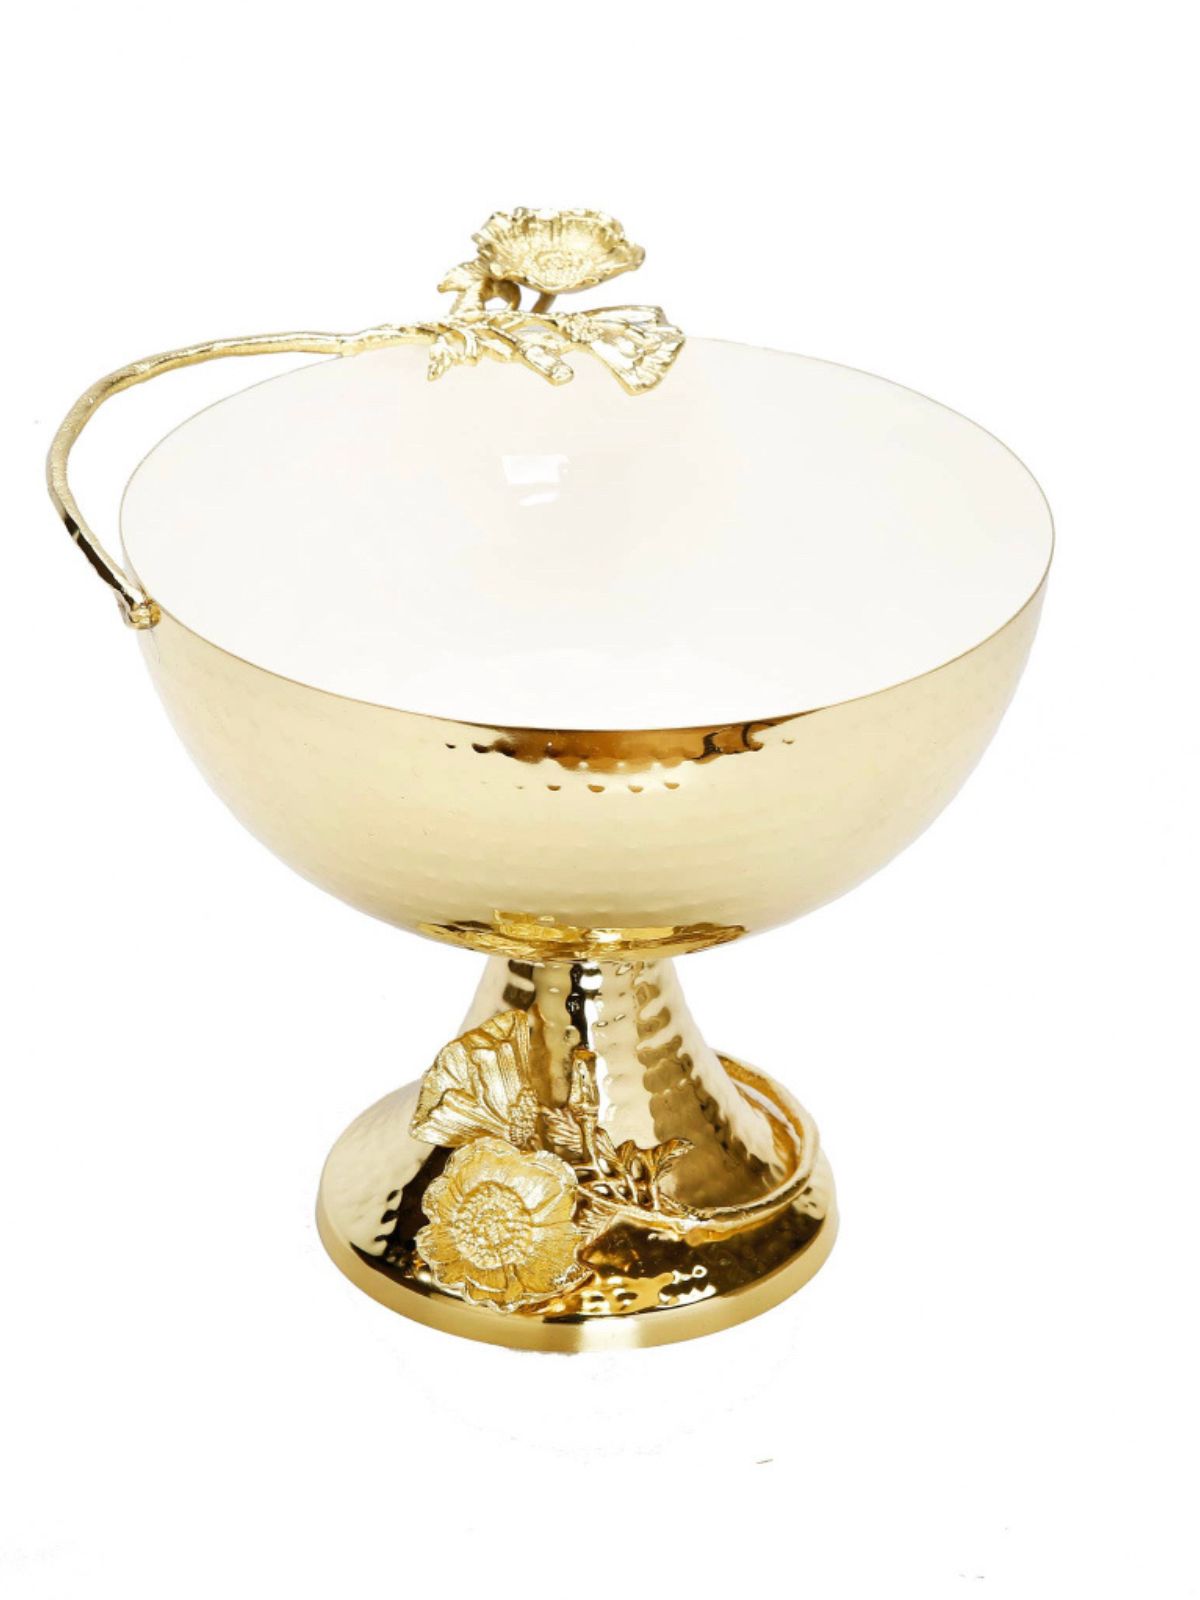 10D Gold Stainless Steel Footed Bowl with white enamel and floral detail | Luxury Bowls.